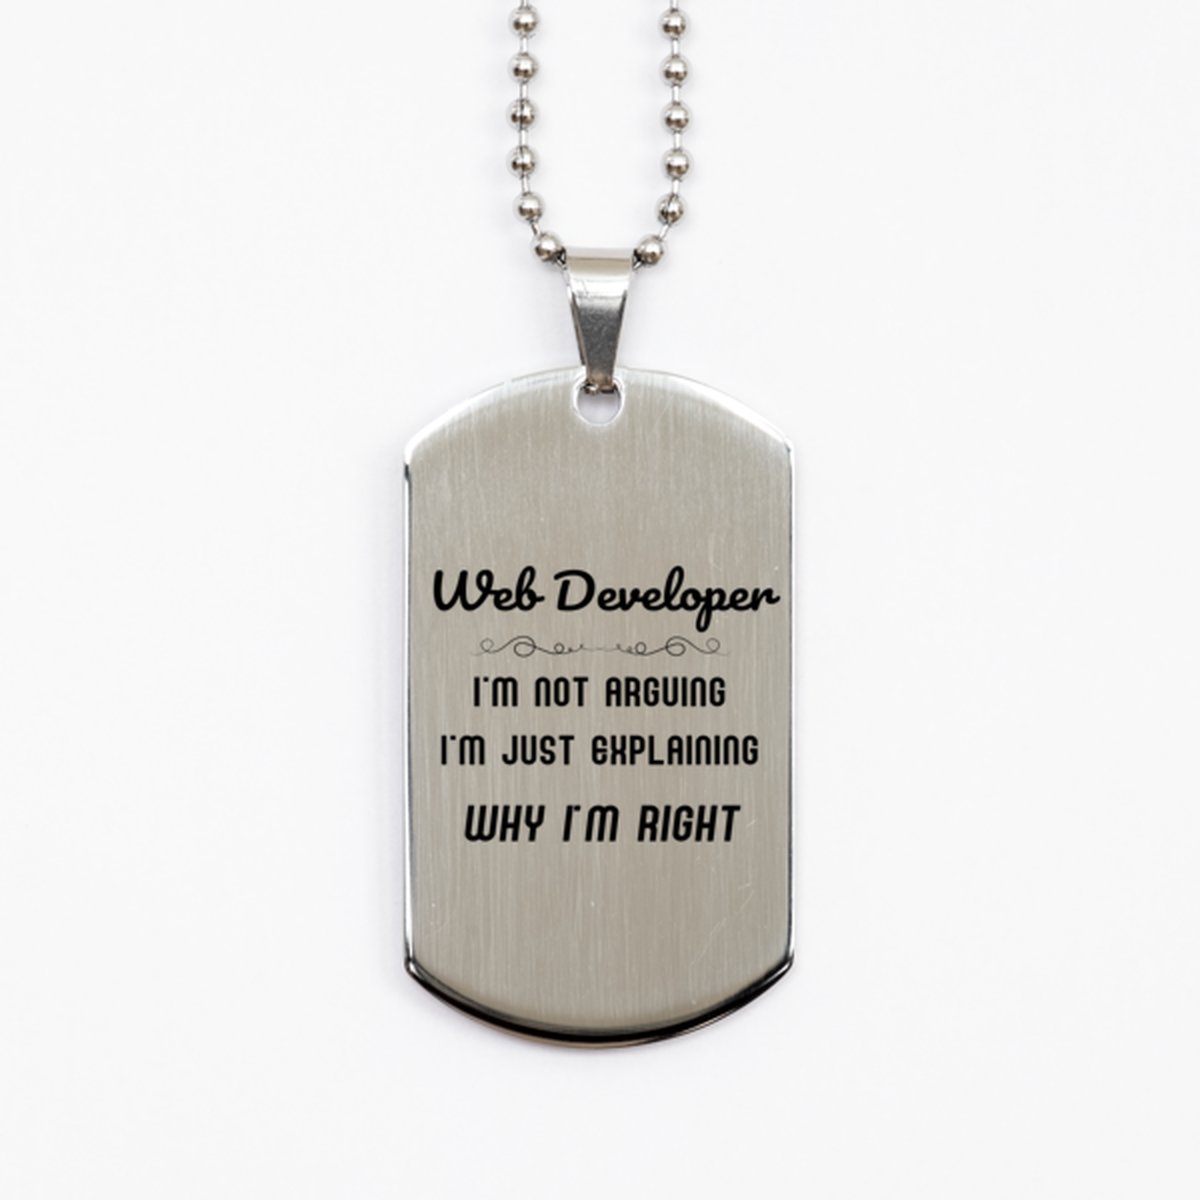 Web Developer I'm not Arguing. I'm Just Explaining Why I'm RIGHT Silver Dog Tag, Funny Saying Quote Web Developer Gifts For Web Developer Graduation Birthday Christmas Gifts for Men Women Coworker